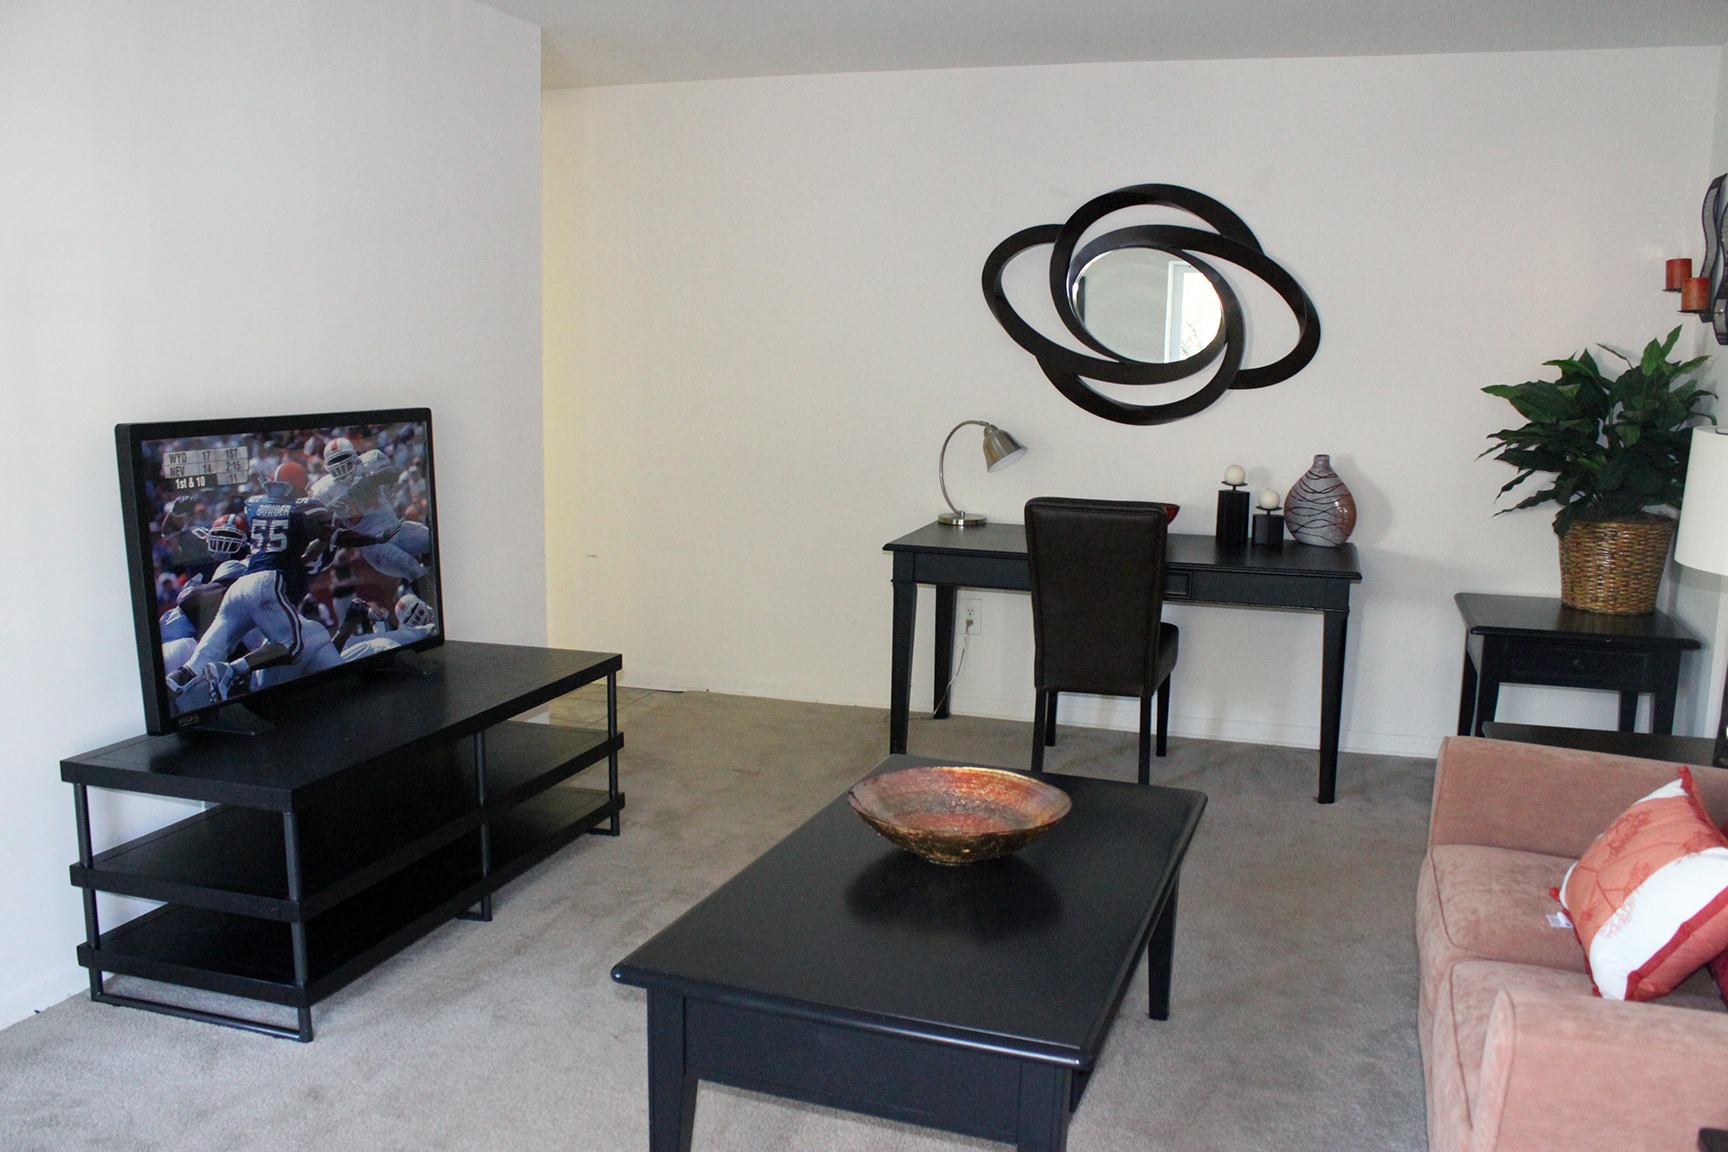 The living room area of an apartment, fitted with a couch, and a TV